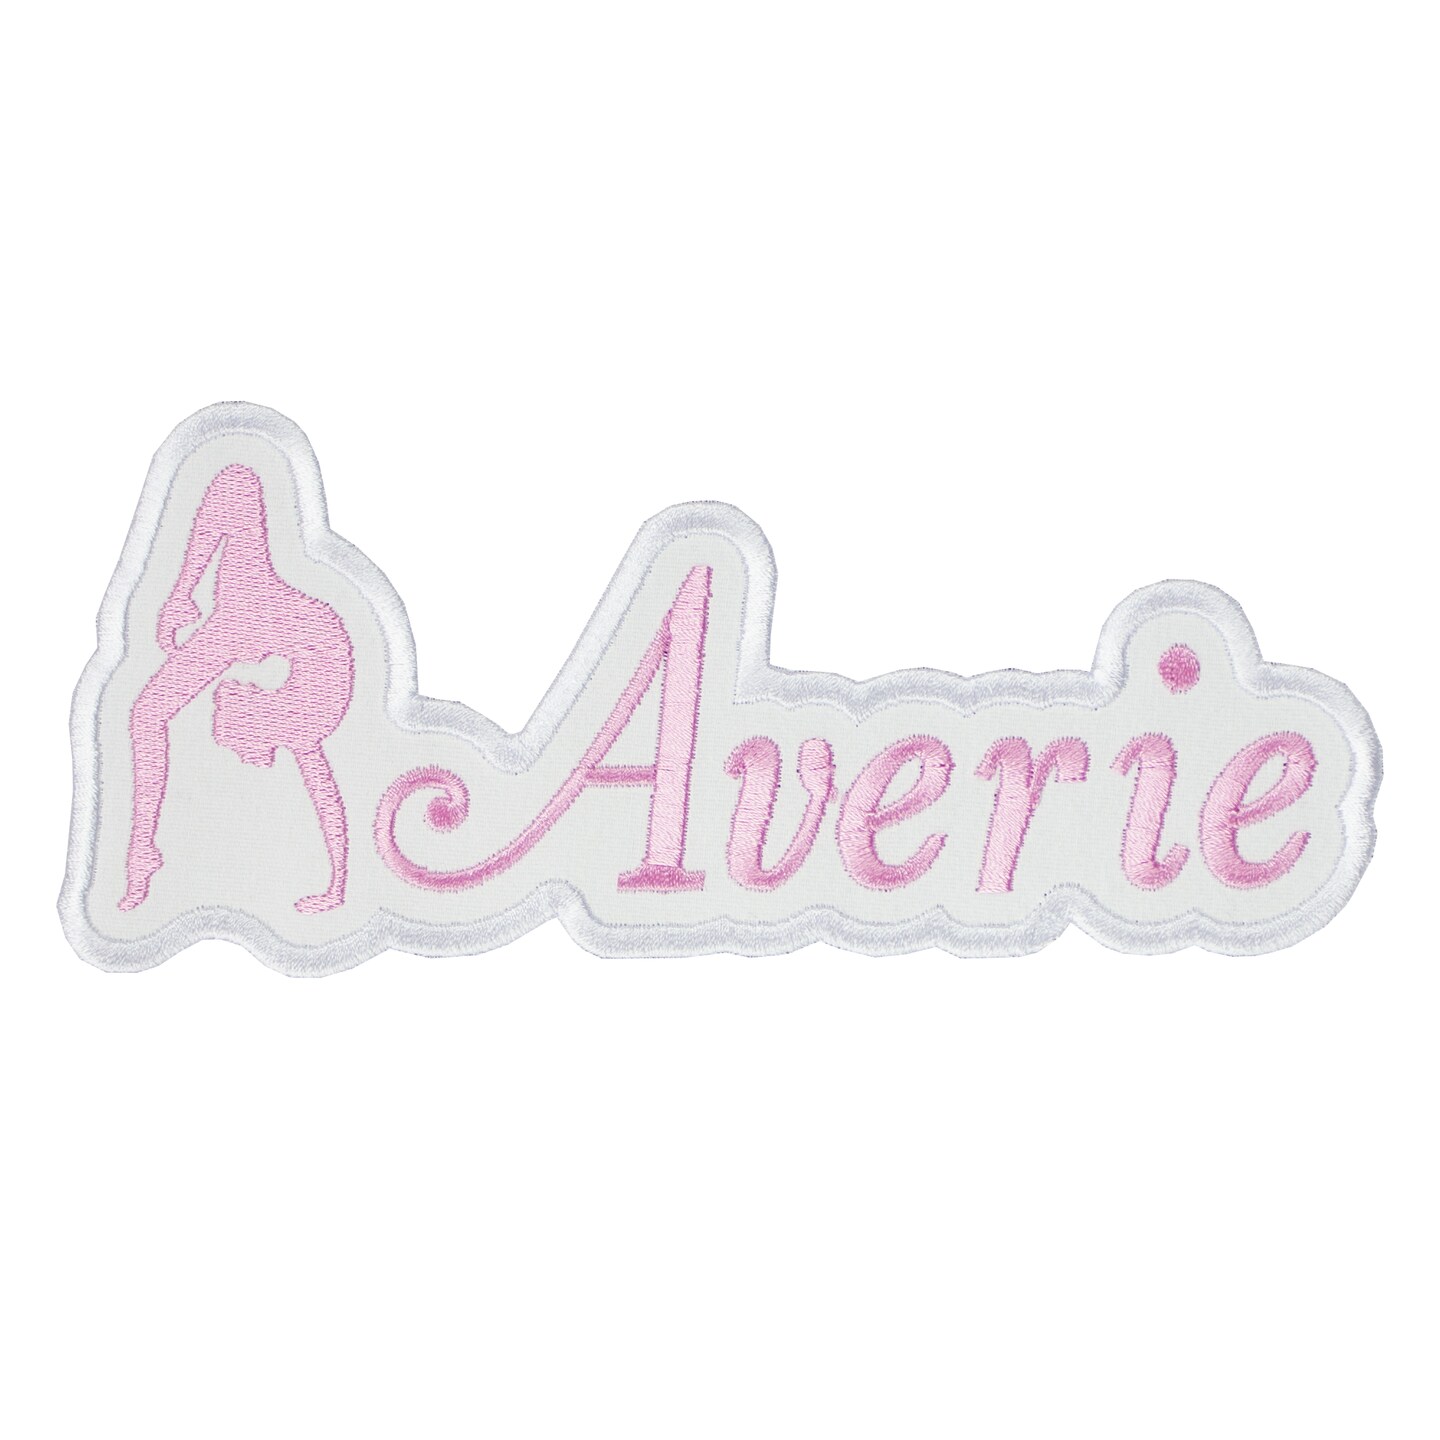 Personalized Embroidered Name Patches, Iron on Name Patches, Iron